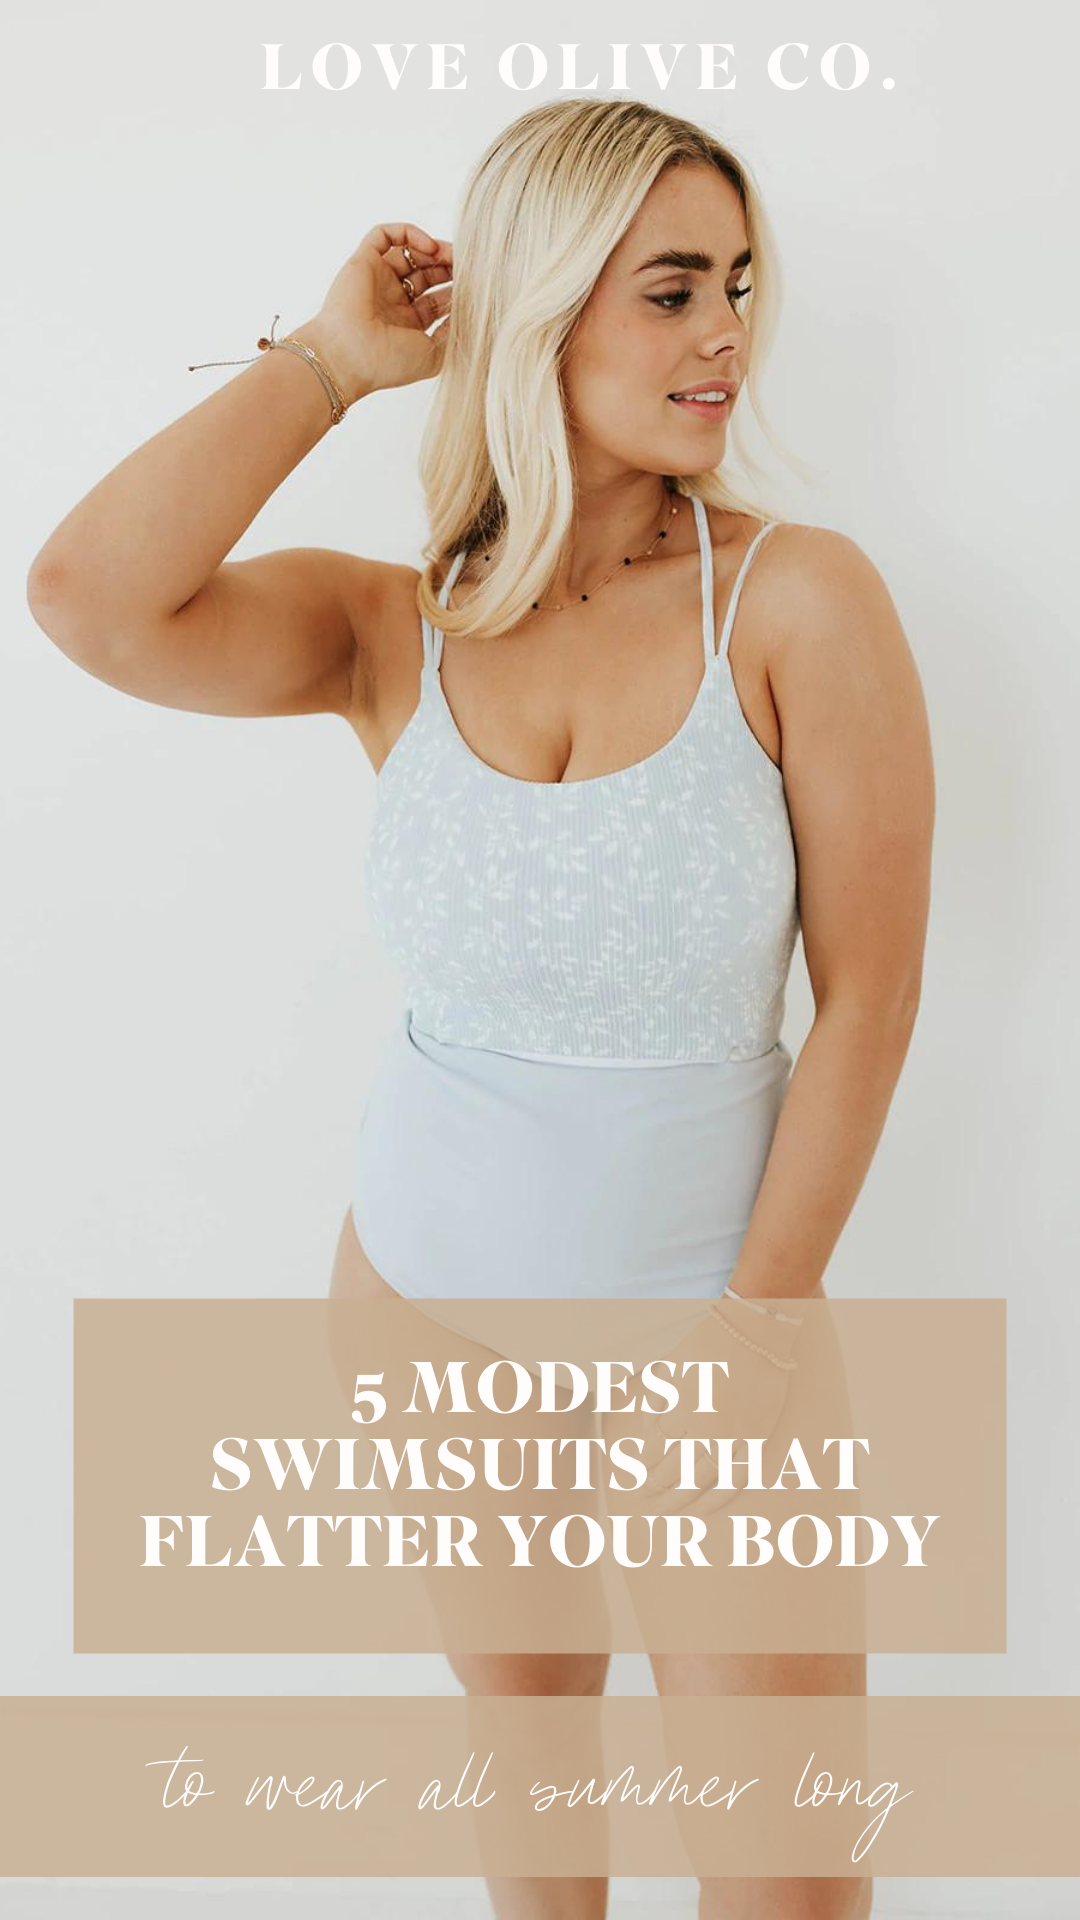 5 modest swimsuits that flatter your body. www.loveoliveco.com